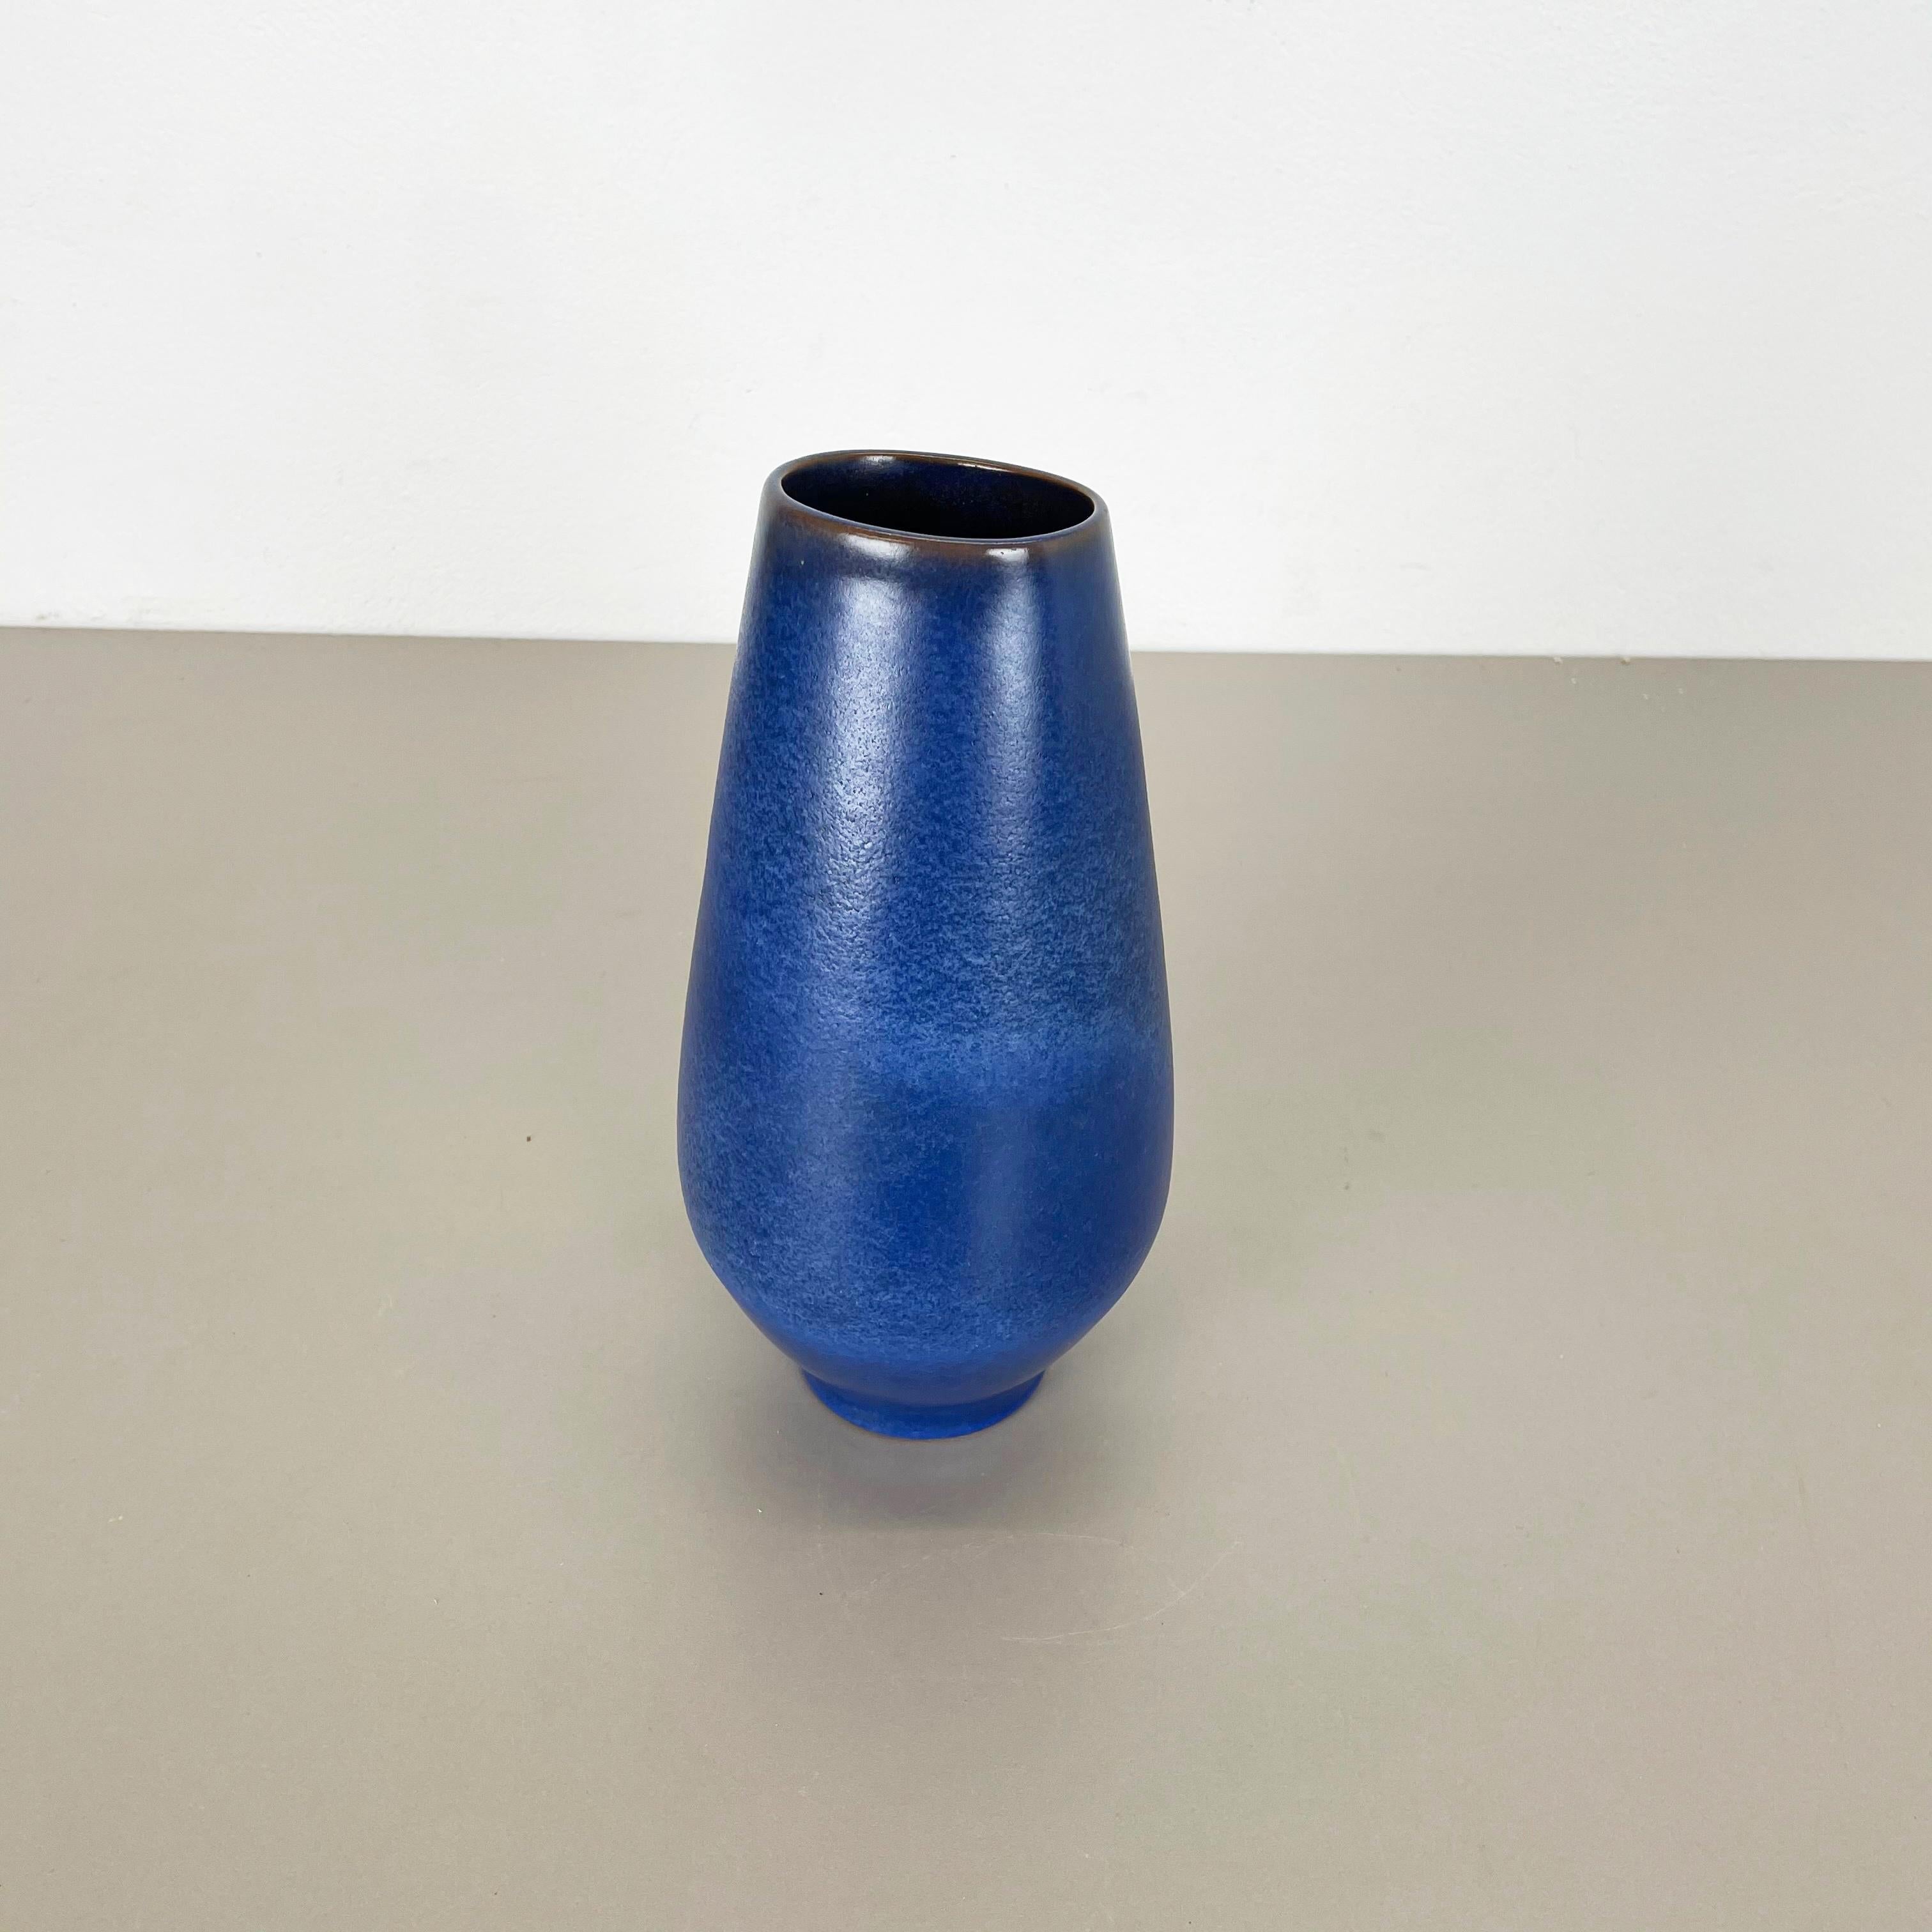 Article:

Pottery ceramic vase


Producer:

Karlsruher Majolika, Germany


Decade:

1950s





Original vintage 1950s pottery ceramic vase in Germany. High quality German production with a nice strong blue tone coloration. The vase